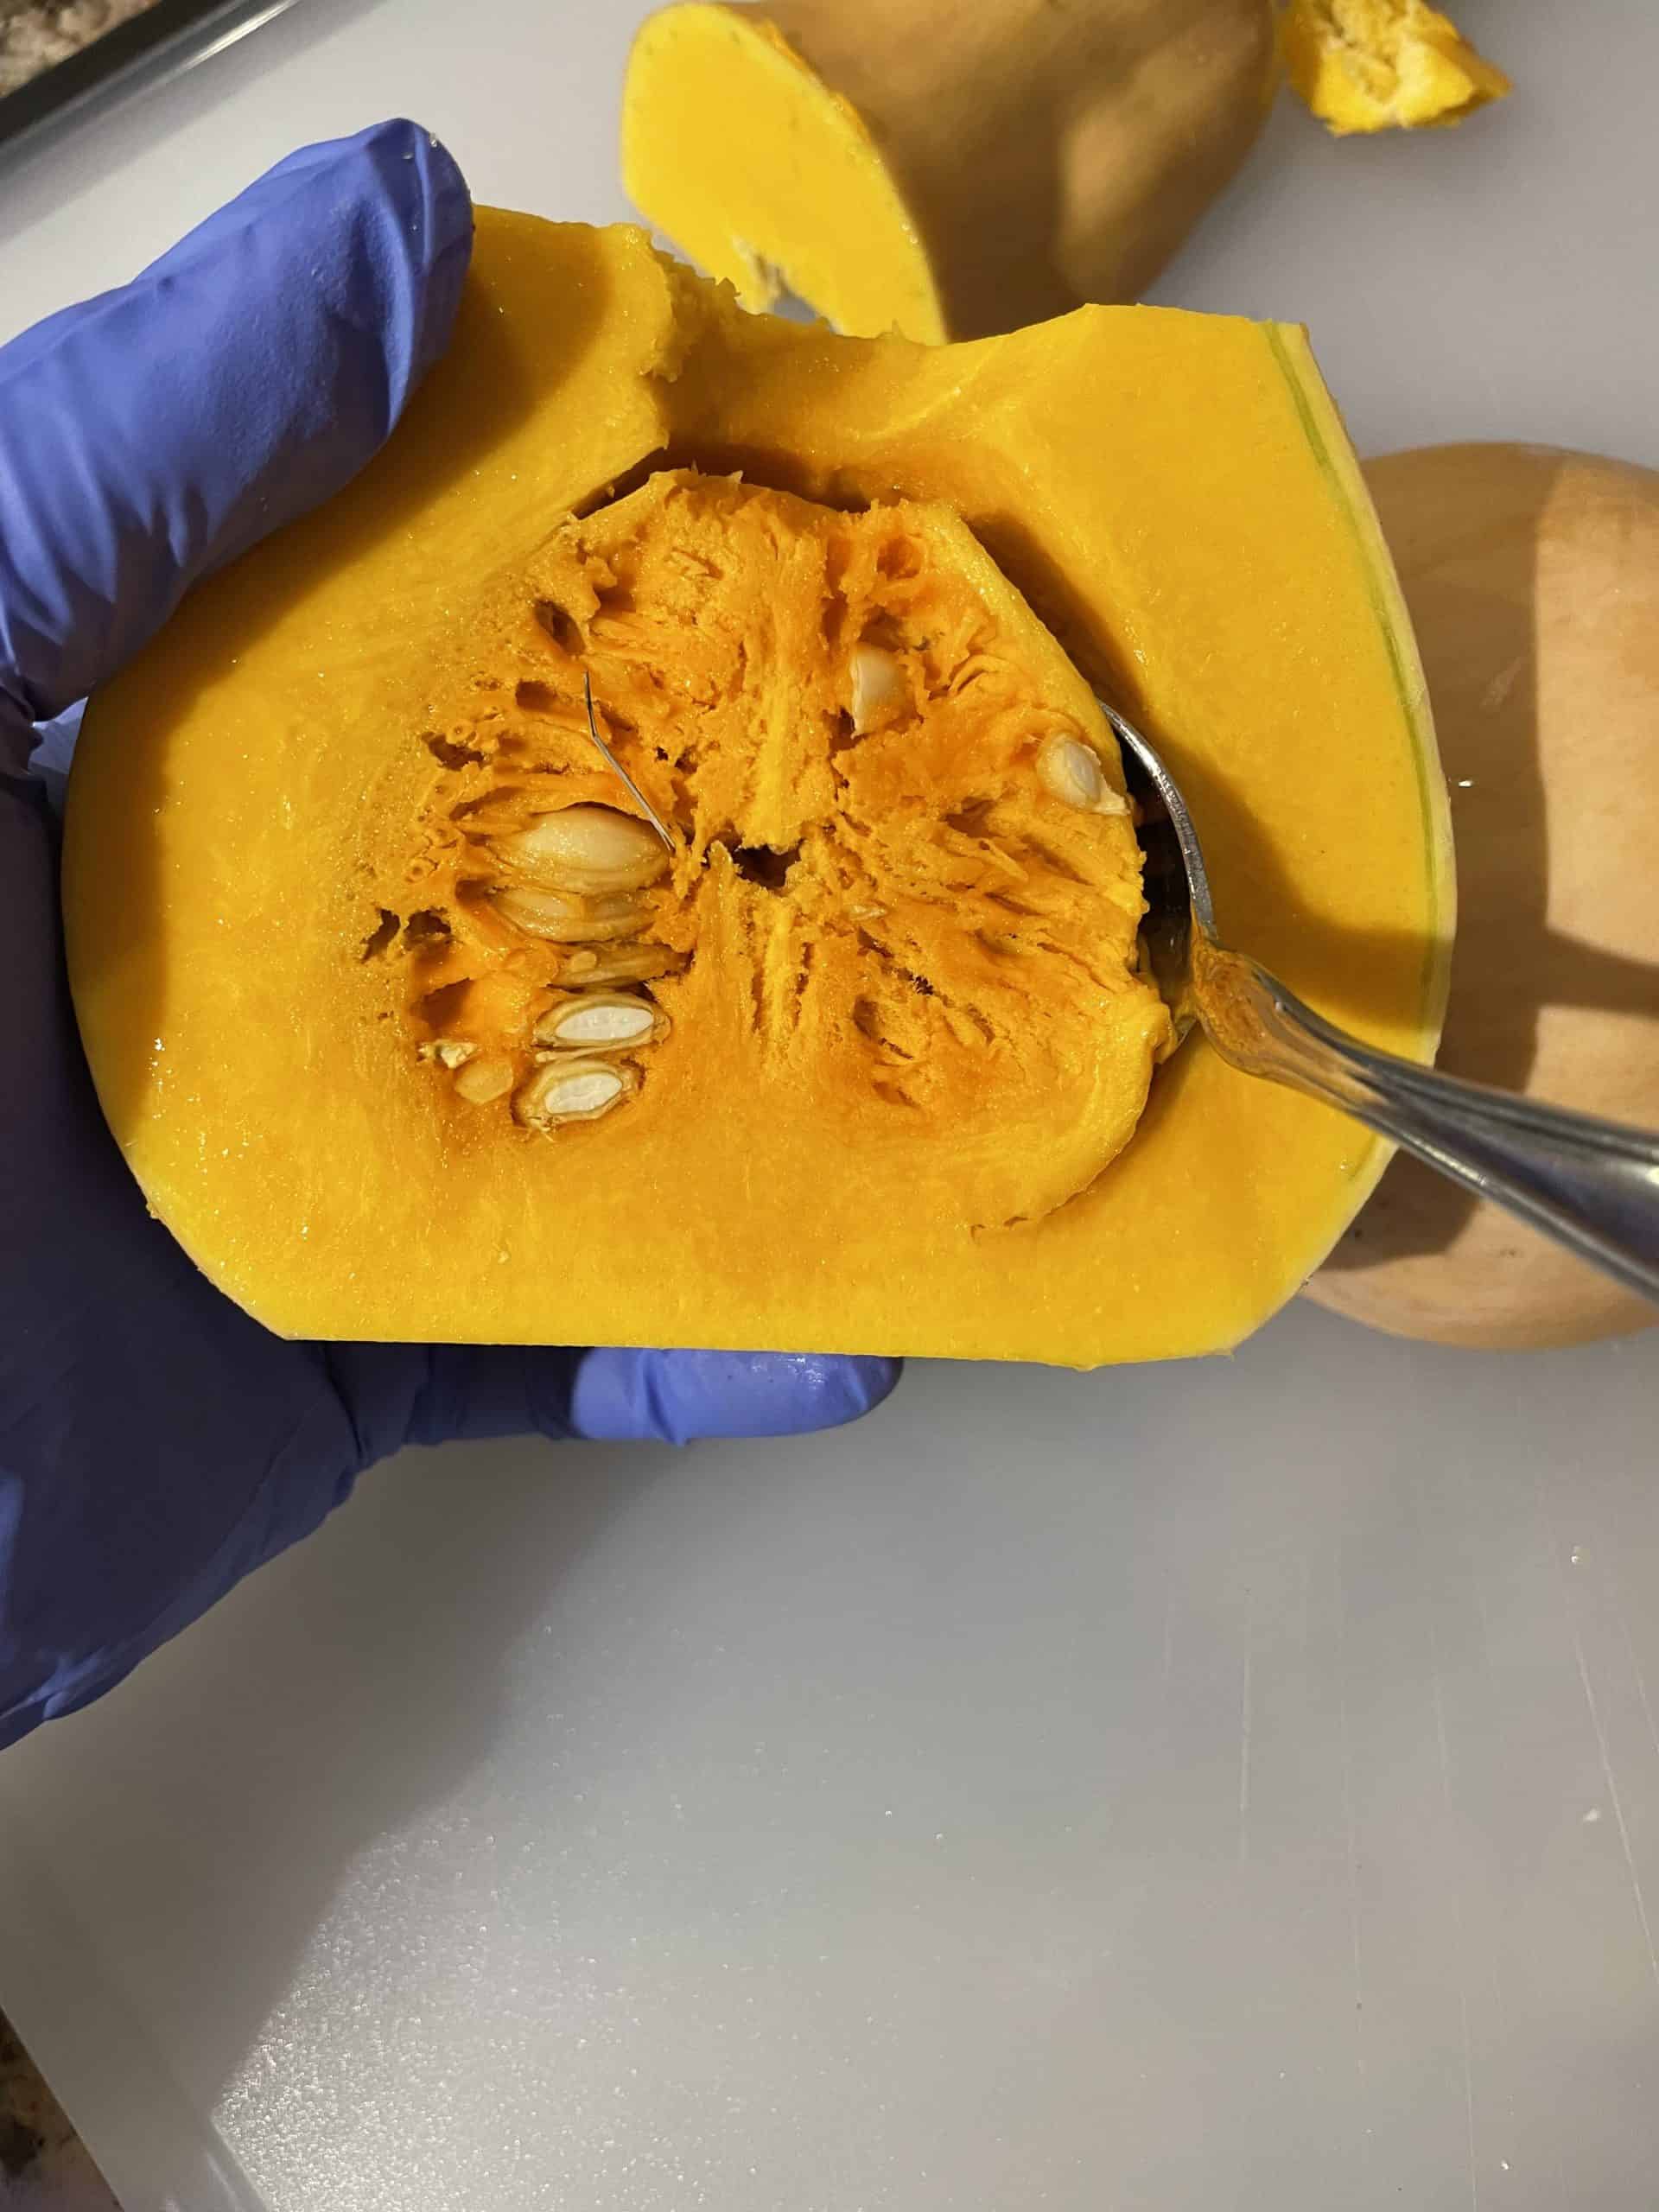 Removing the seeds from the center of a butternut squash with a spoon.